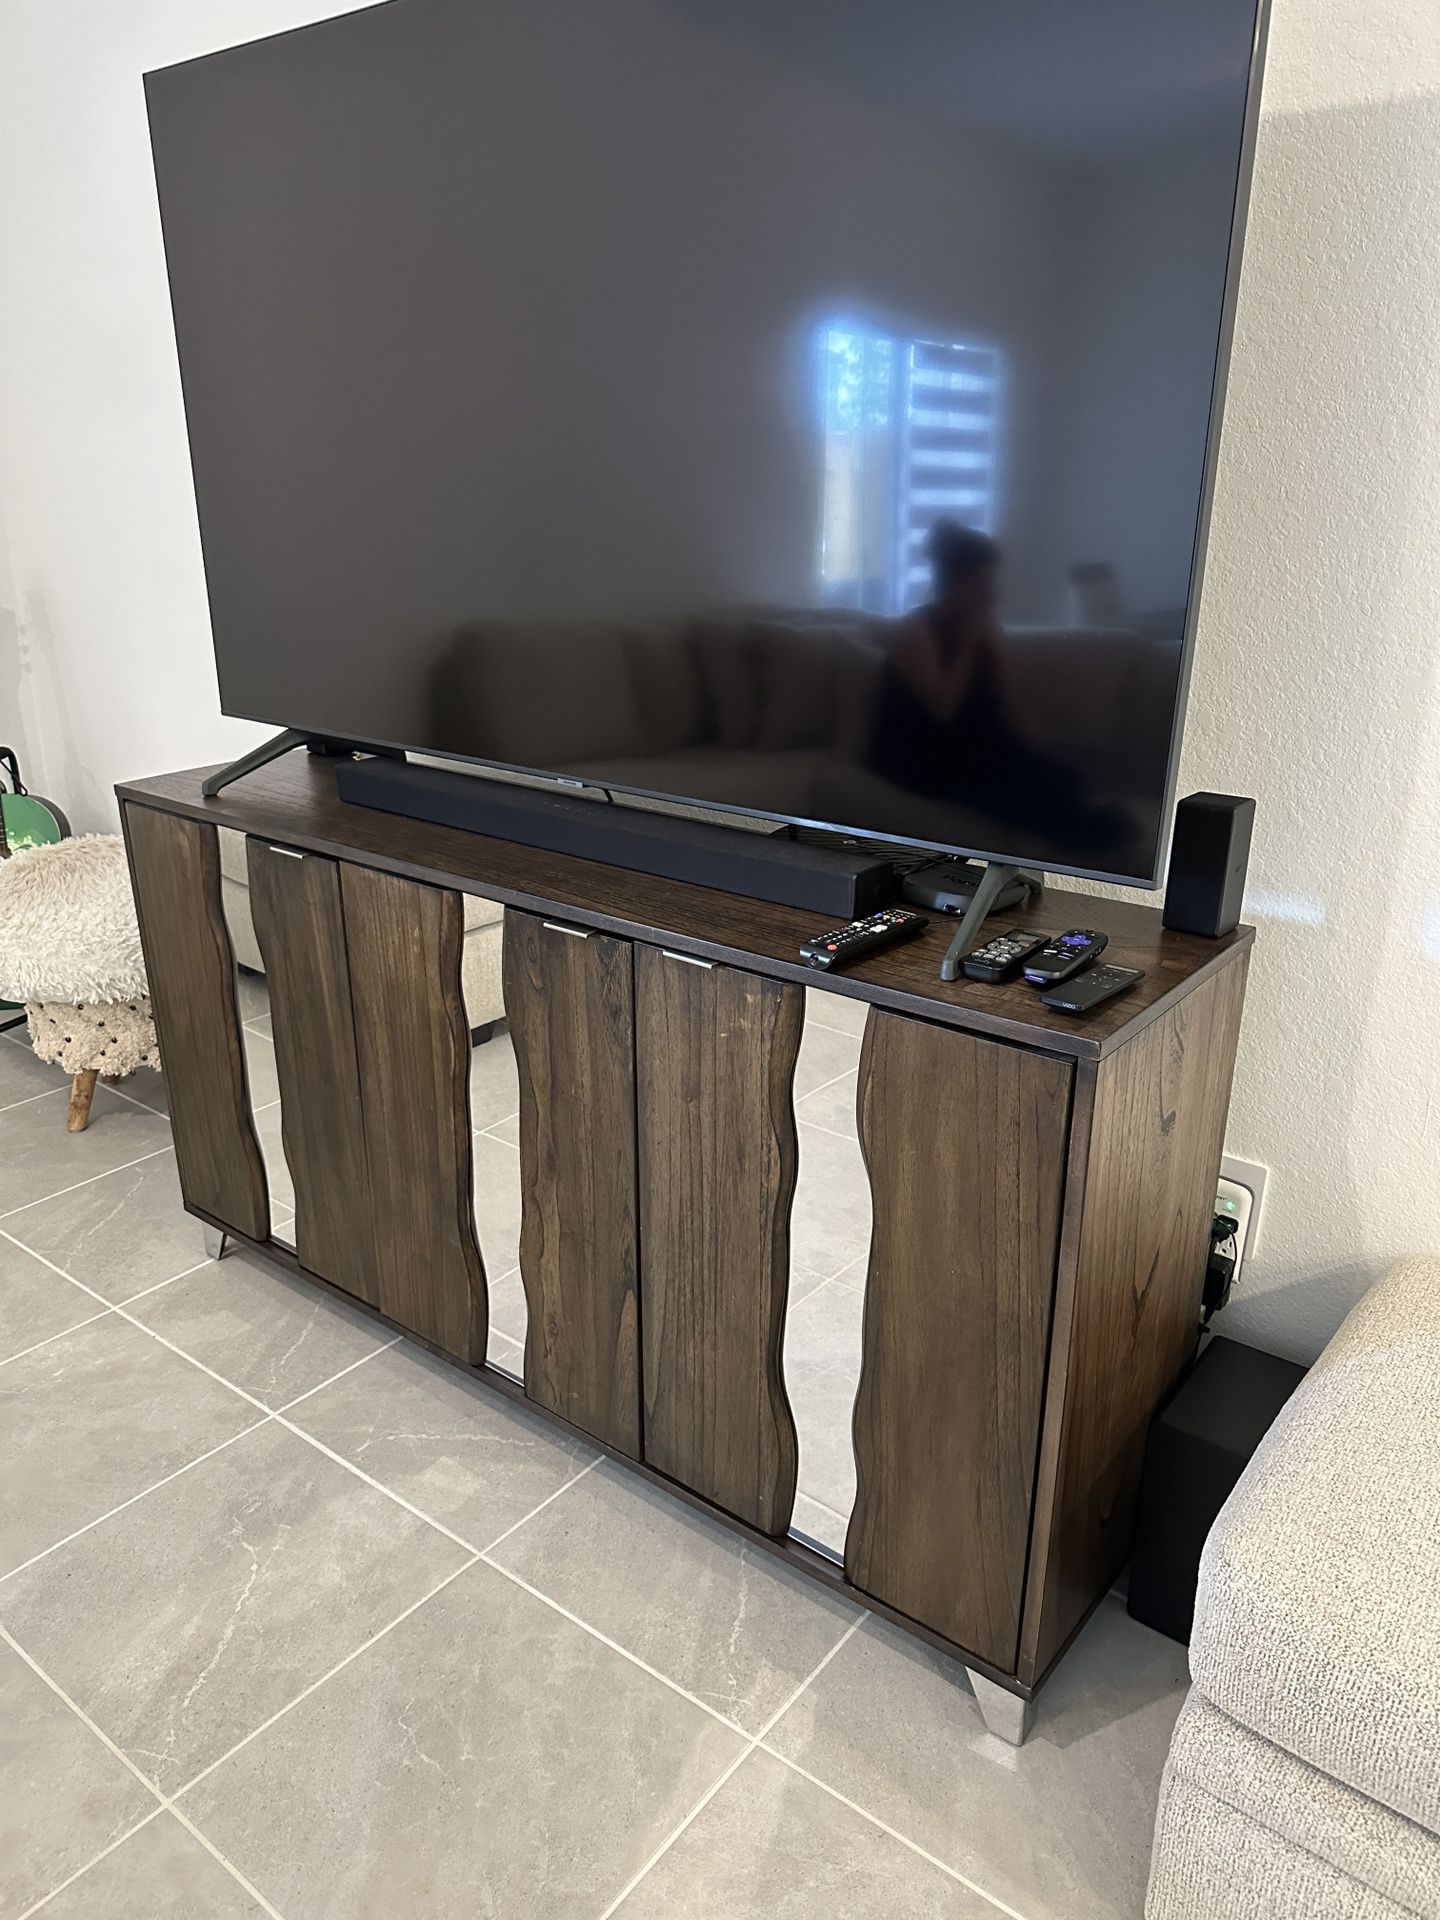 Wood TV Console Media Cabinet with Storage, Entertainment Center for Living Room Bedroom